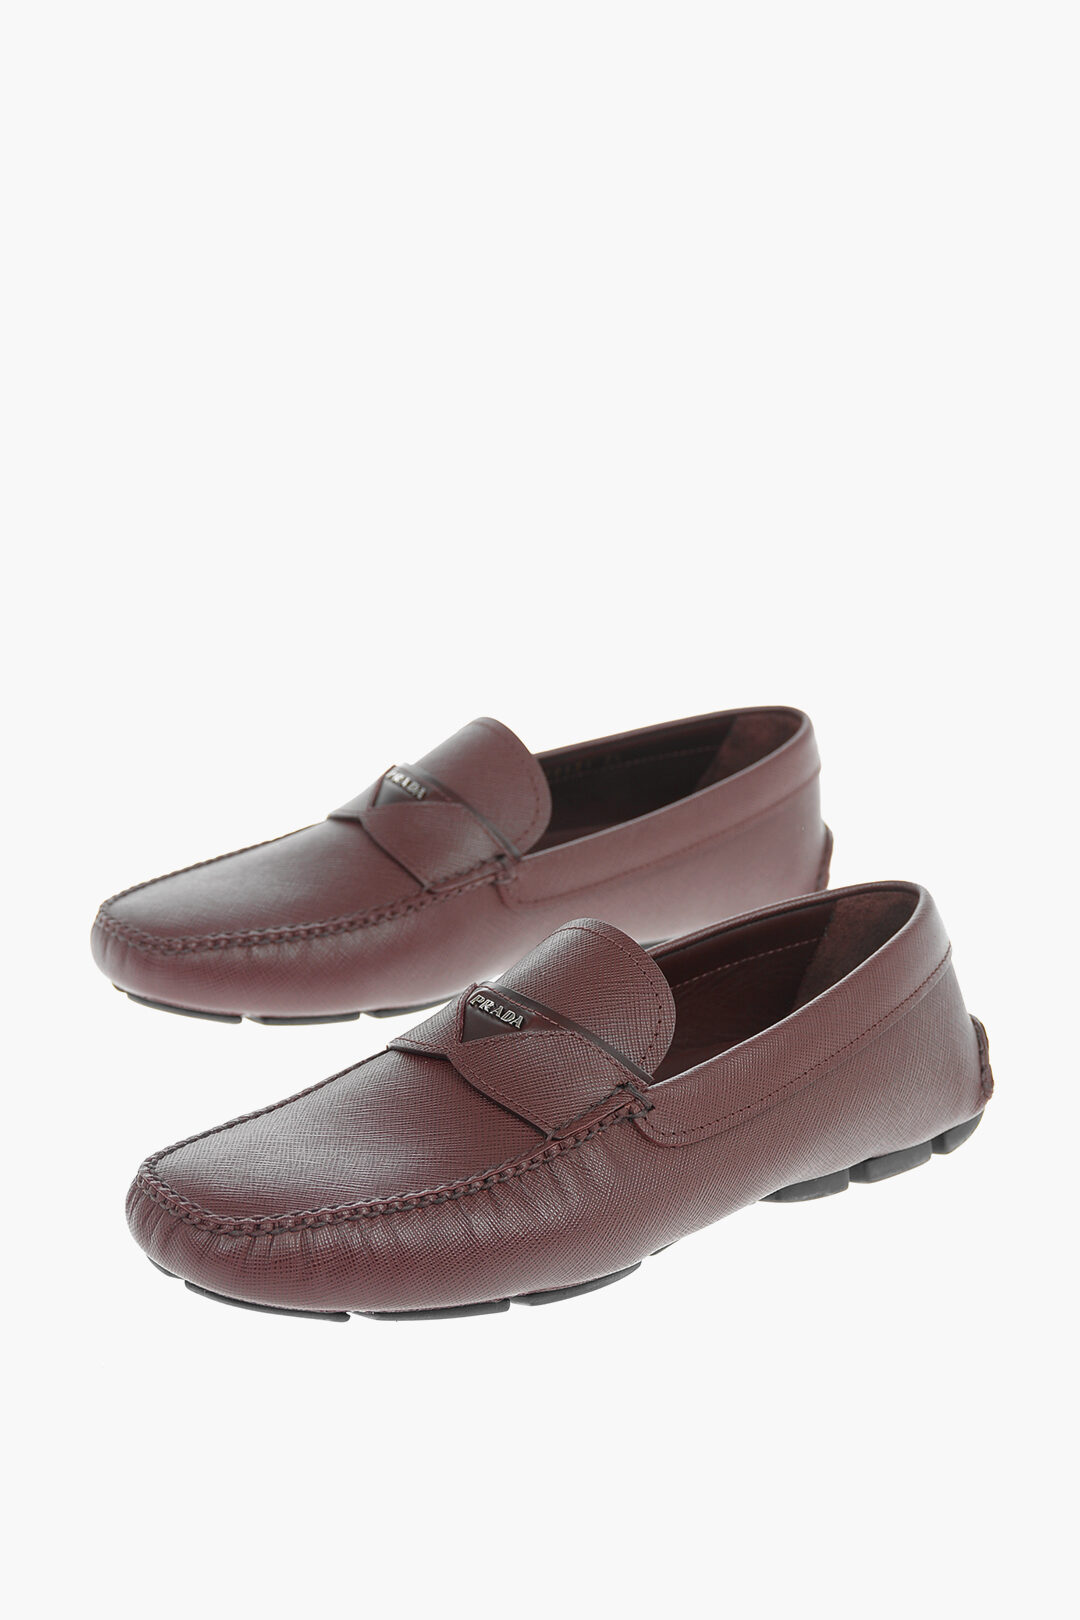 Prada Saffiano Leather Loafers men - Glamood Outlet